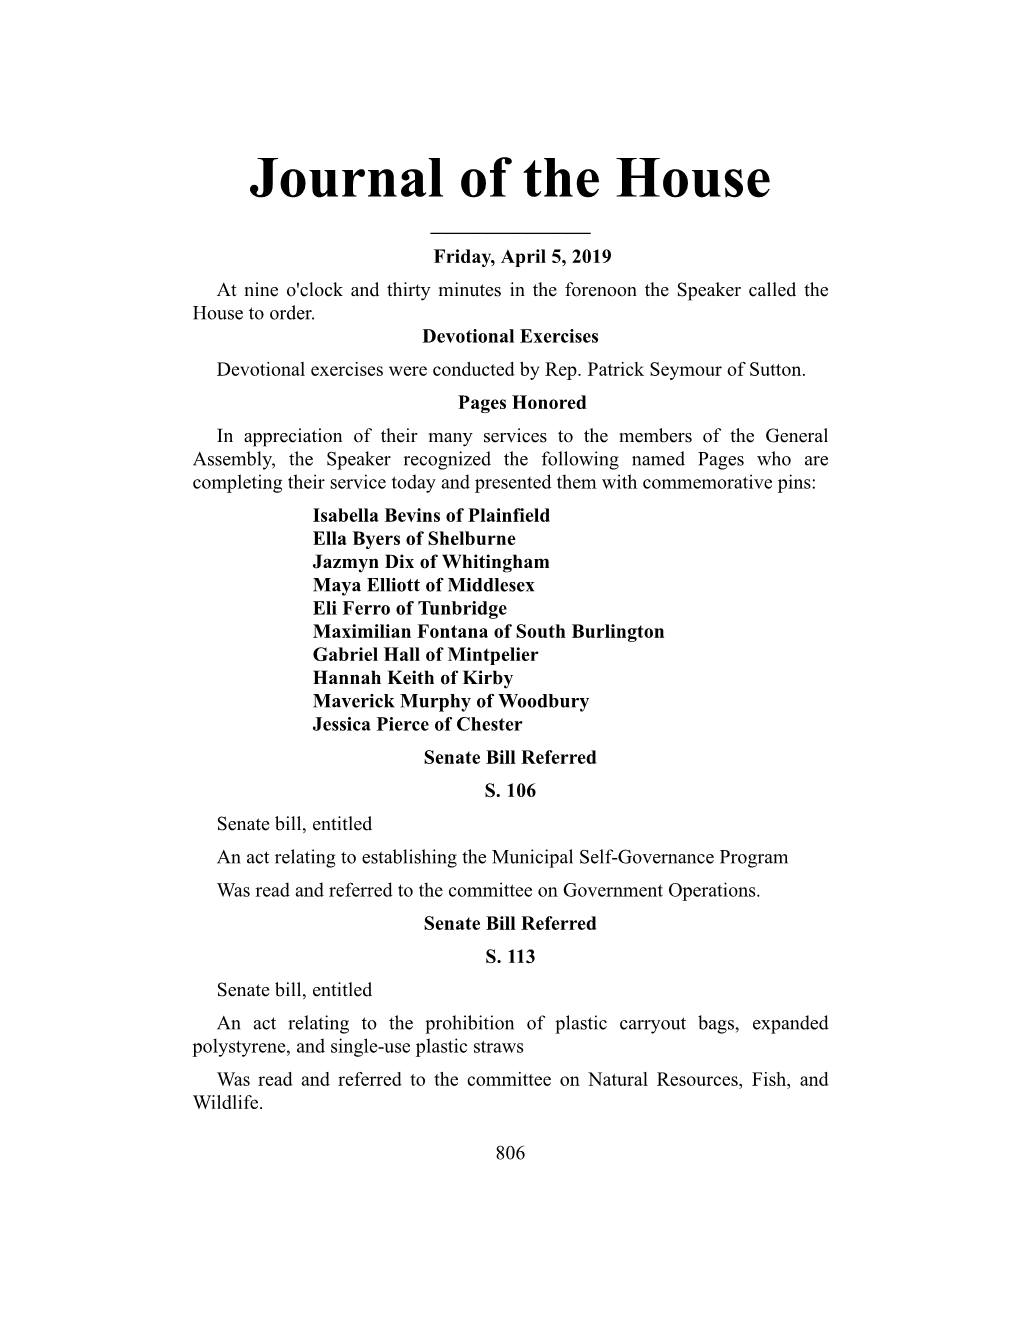 Journal of the House ______Friday, April 5, 2019 at Nine O'clock and Thirty Minutes in the Forenoon the Speaker Called the House to Order